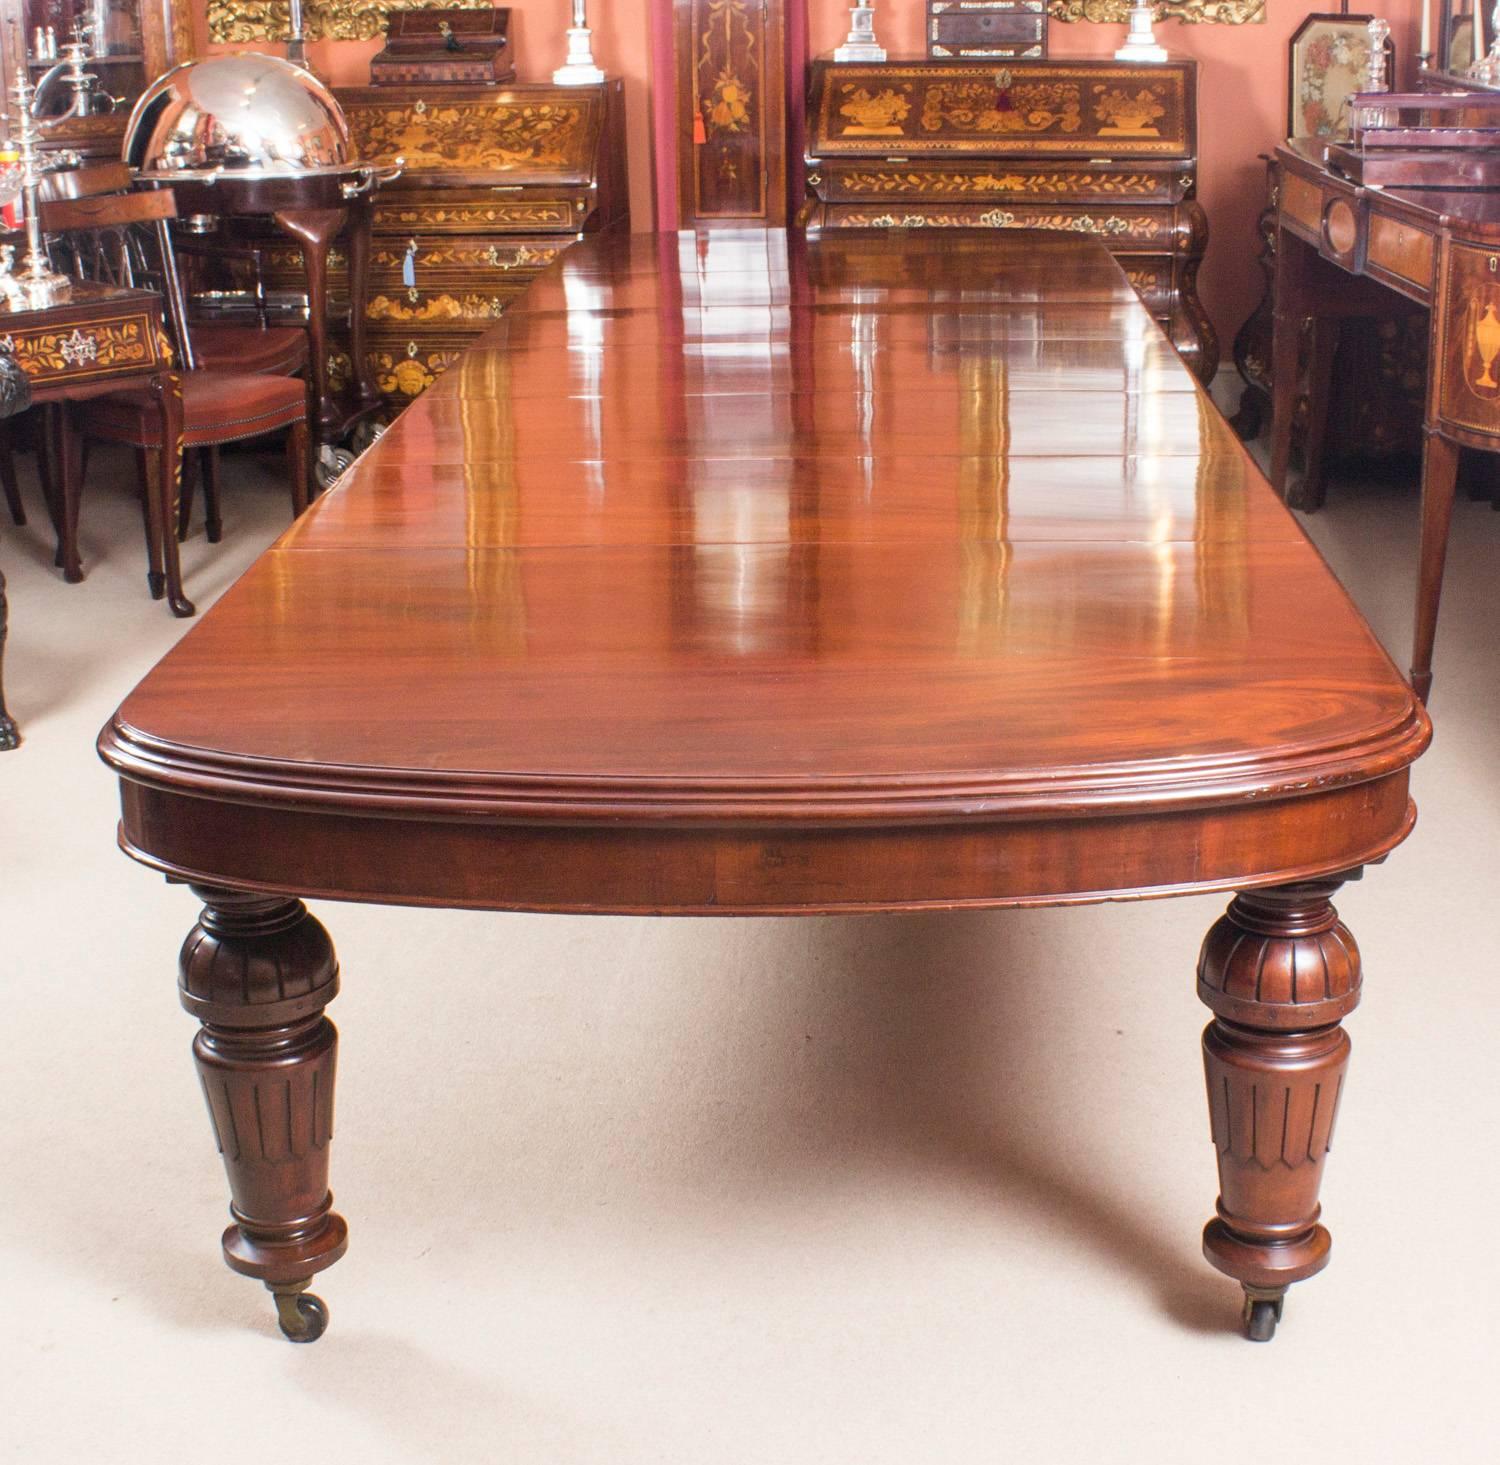 English Antique D-End Mahogany Dining Table and 14 Upholstered Back Chairs, 19th Century